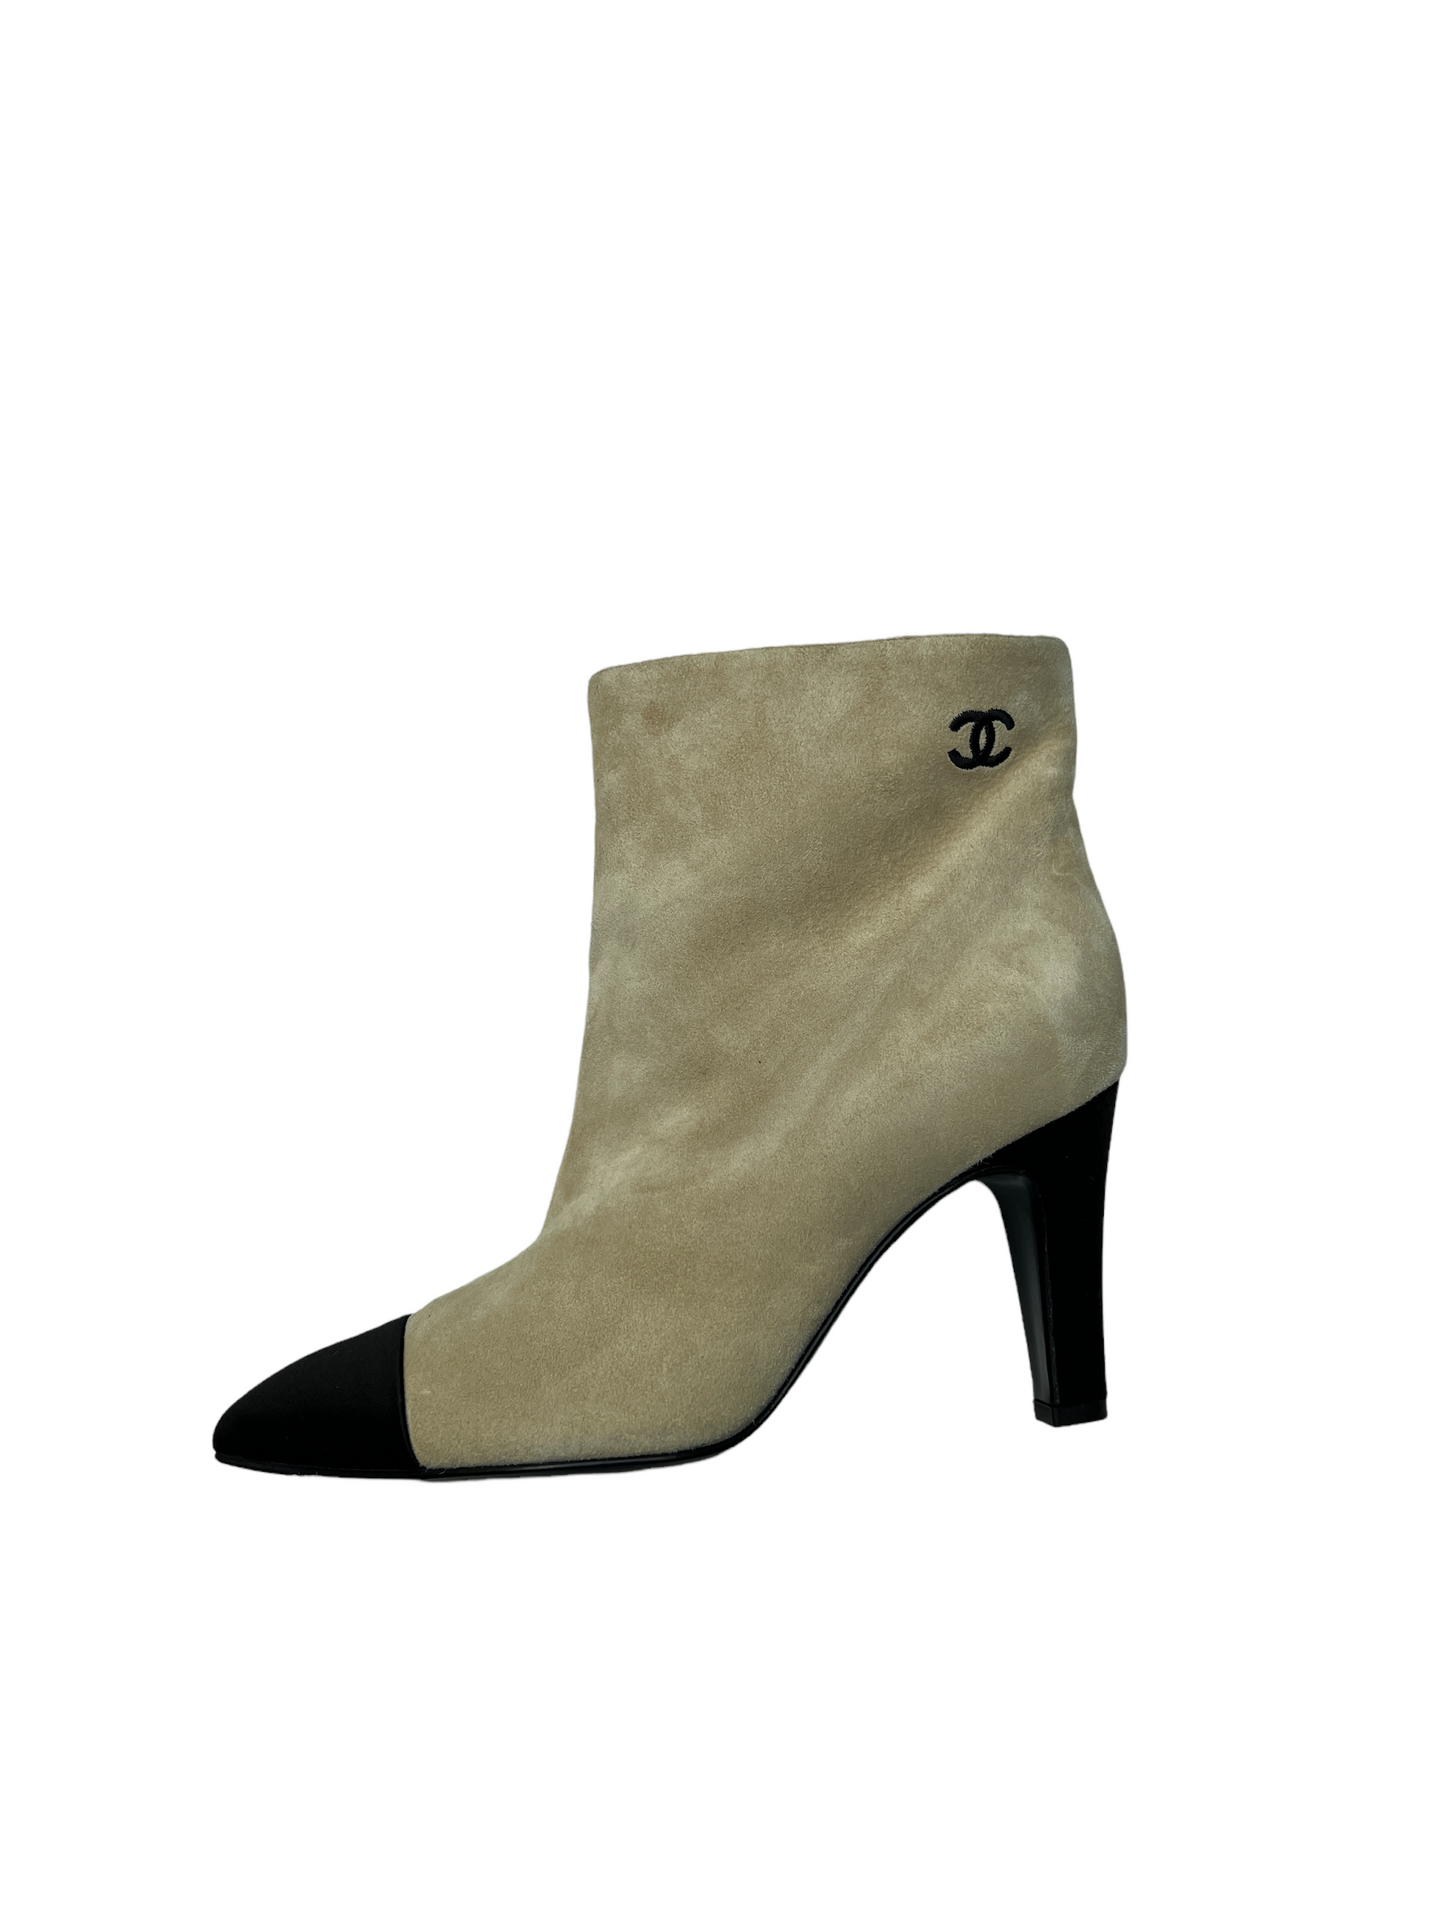 Suede Boots - 6.5